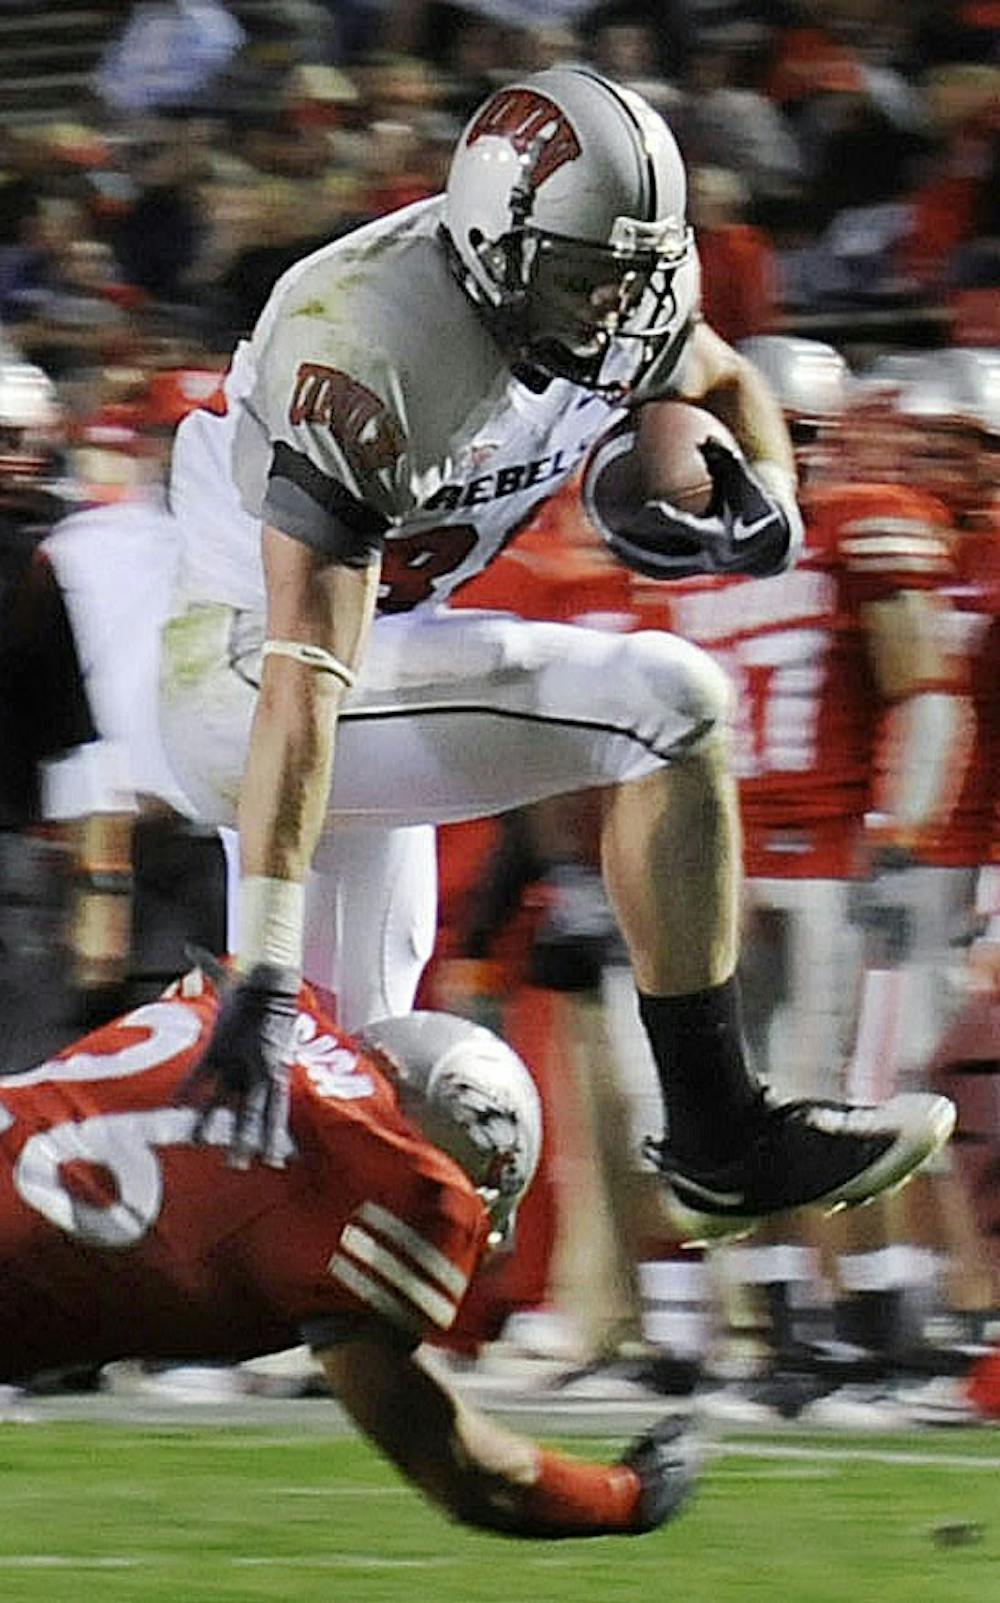 	UNLV wide receiver Ryan Wolfe hurdles over Lobo safety Frankie Baca in Saturday’s 34-17 drubbing at University Stadium. Wolfe had 11 receptions for 118 yards.